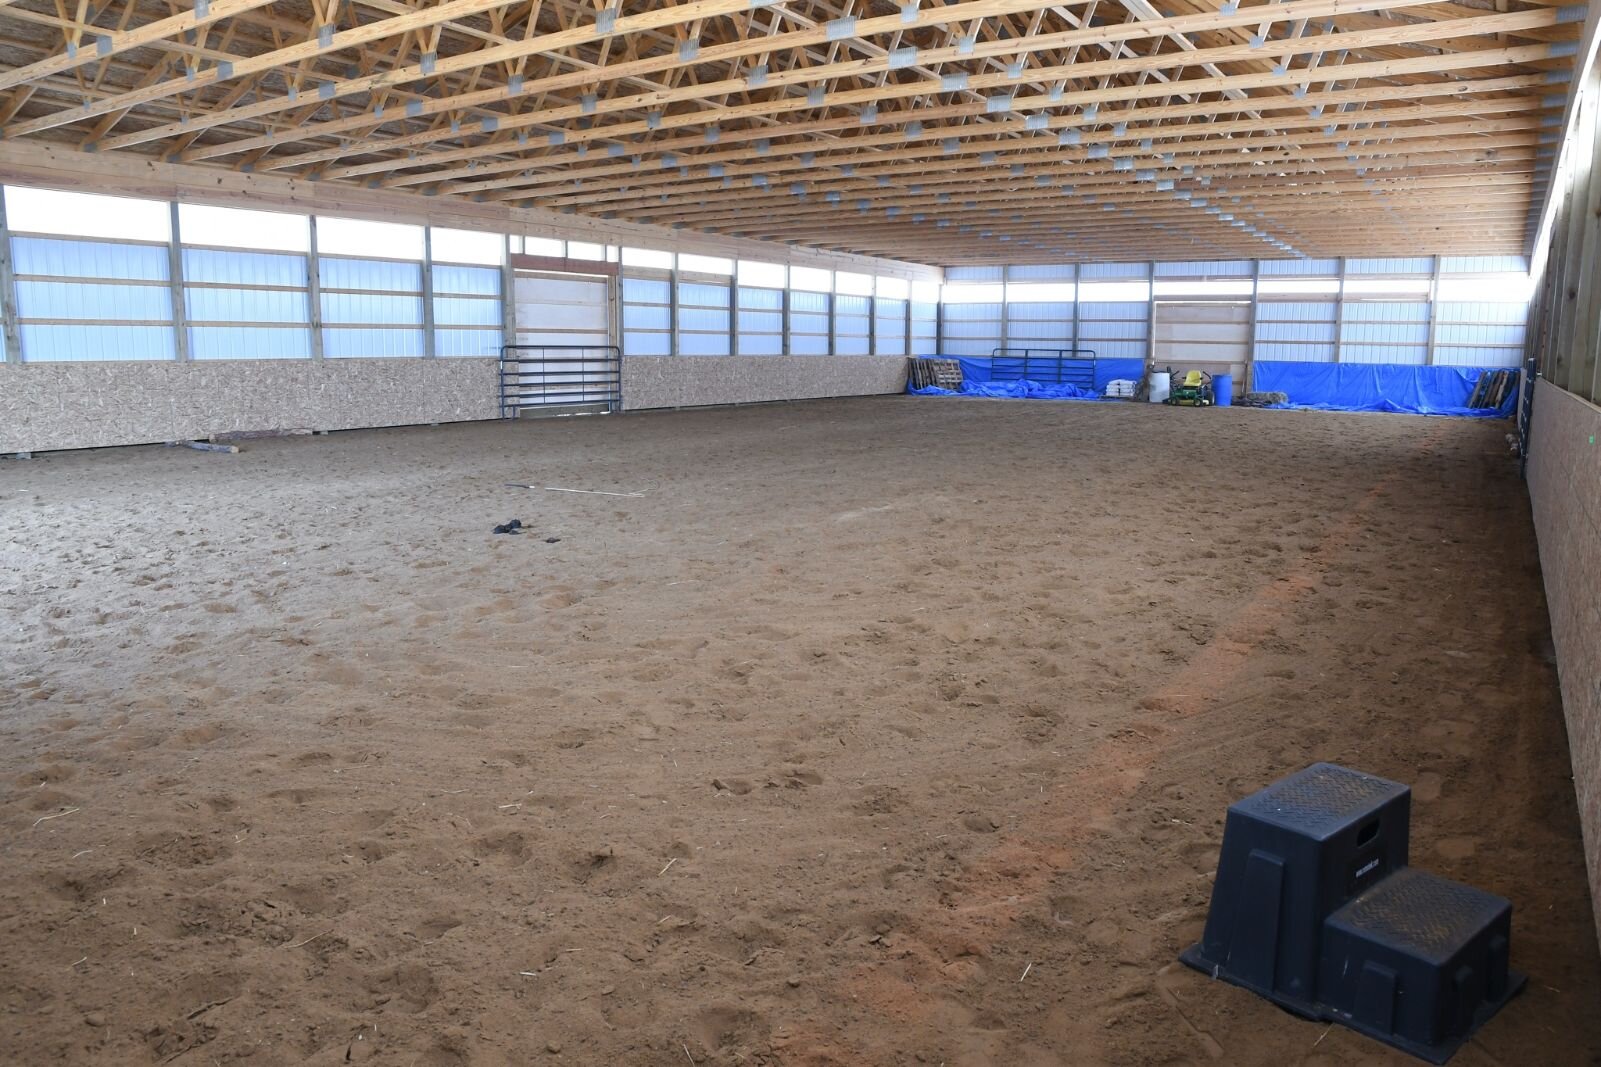 Inside the show barn at Paint Pony Haven.